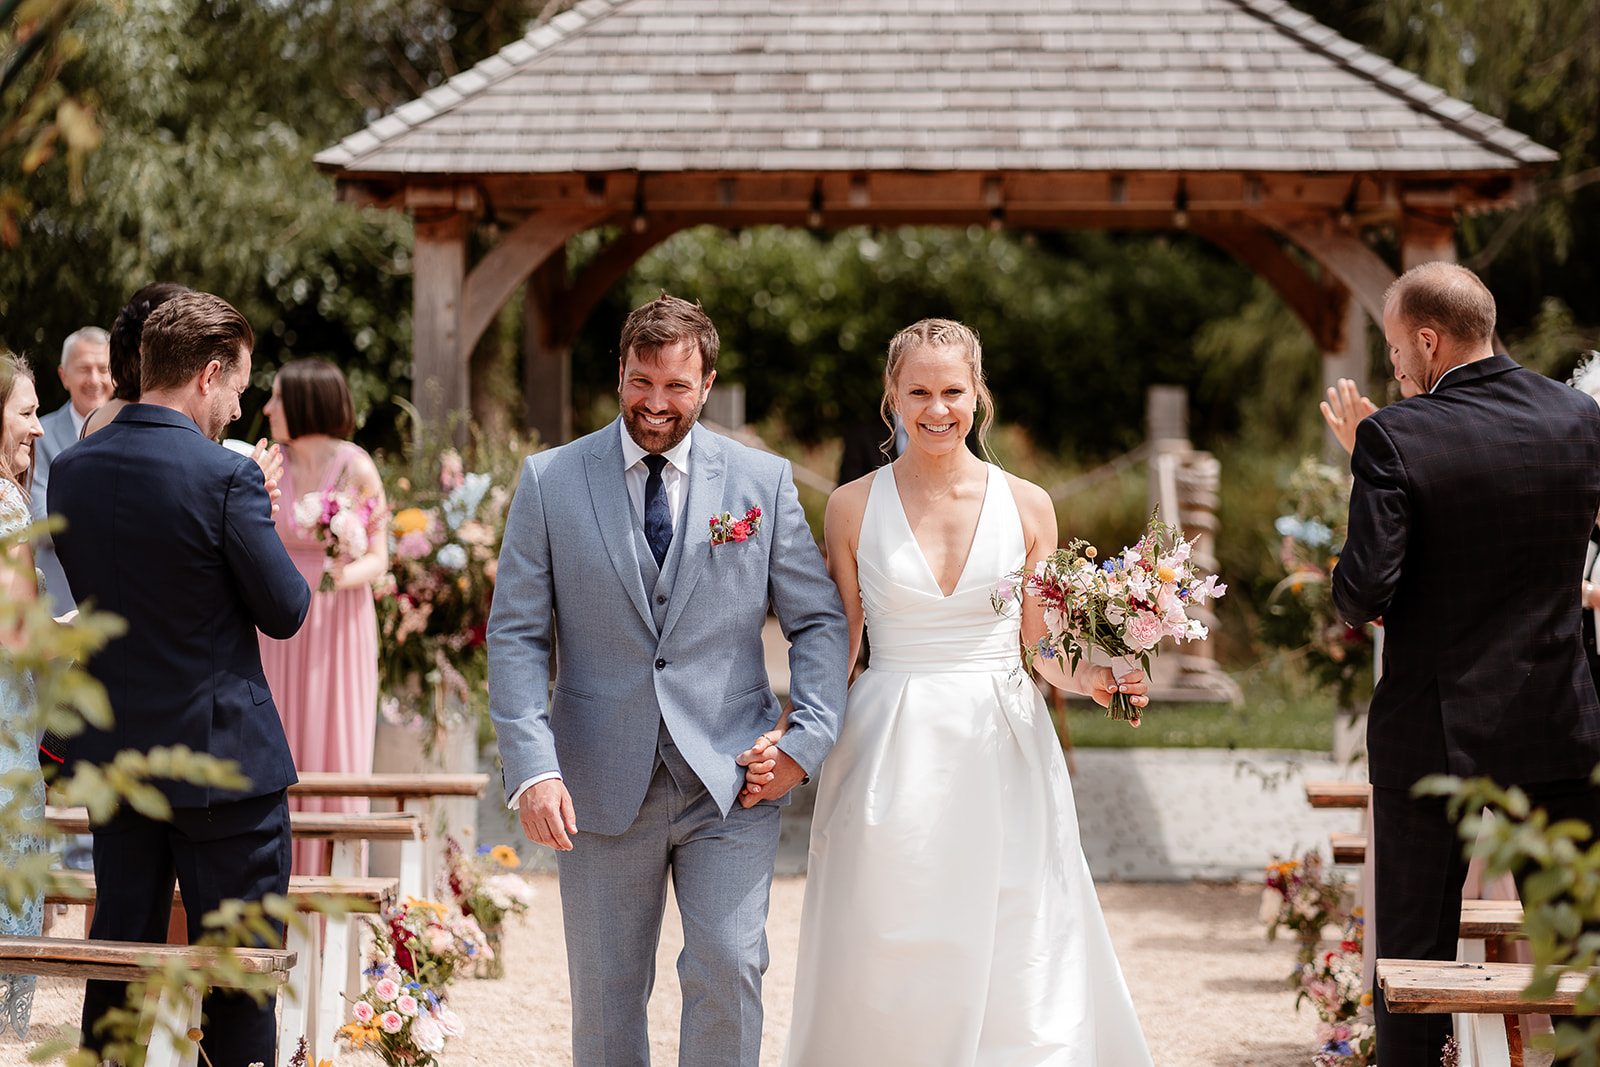 Joyful bride and groom walk out of their ceremony together at a summer wedding at Silchester Farm